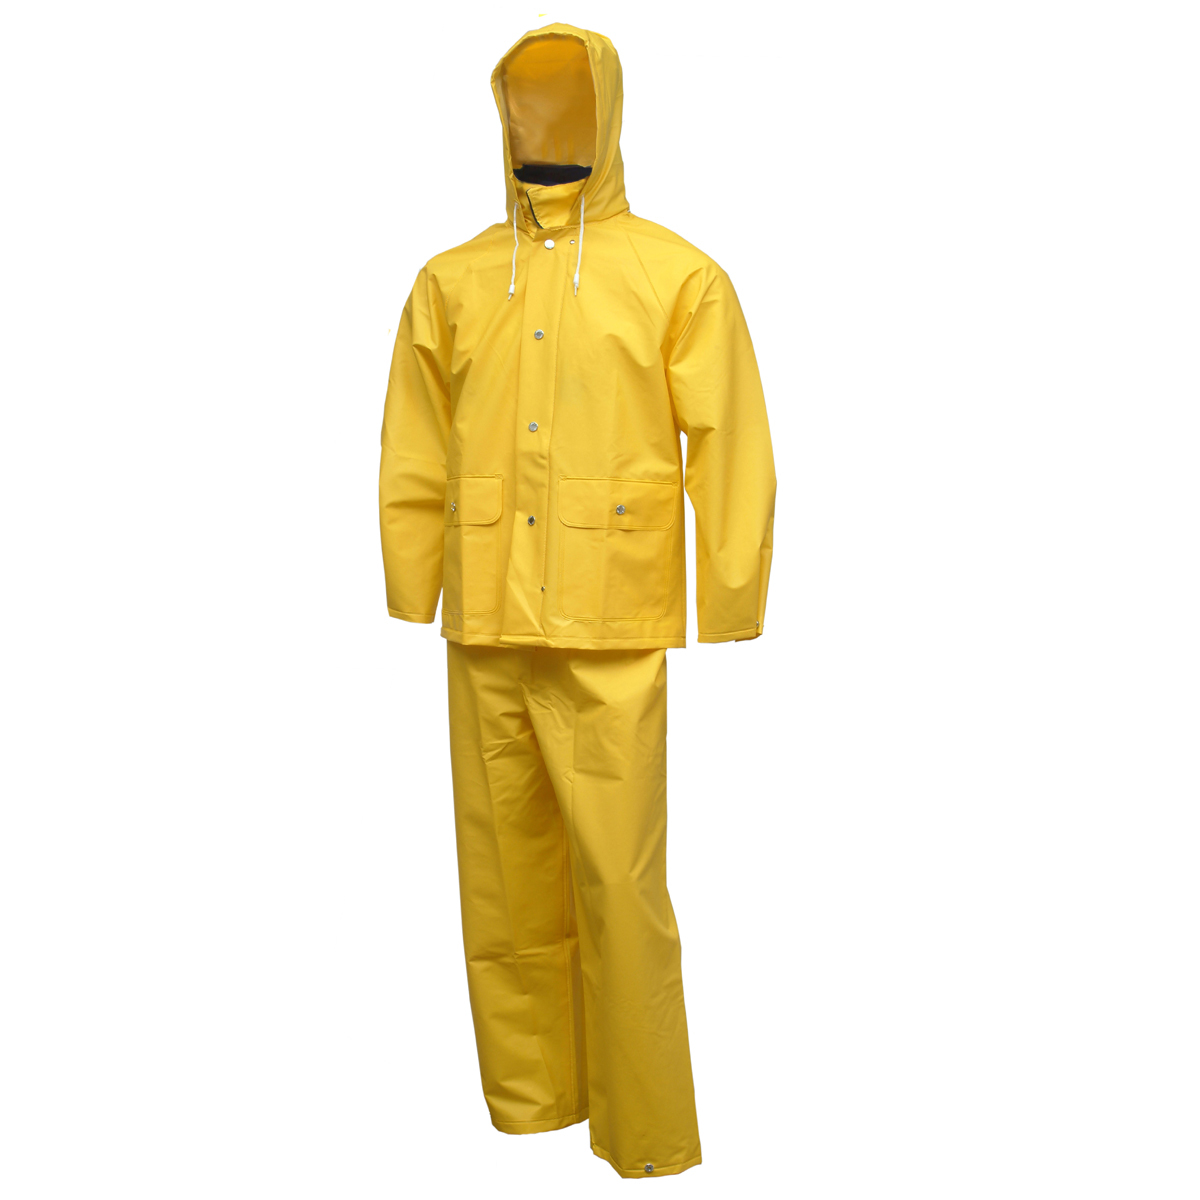 Tingley 2X Yellow Industrial Work .35 mm PVC And Polyester 3-Piece Rain Suit With Jacket, Hood And Overalls